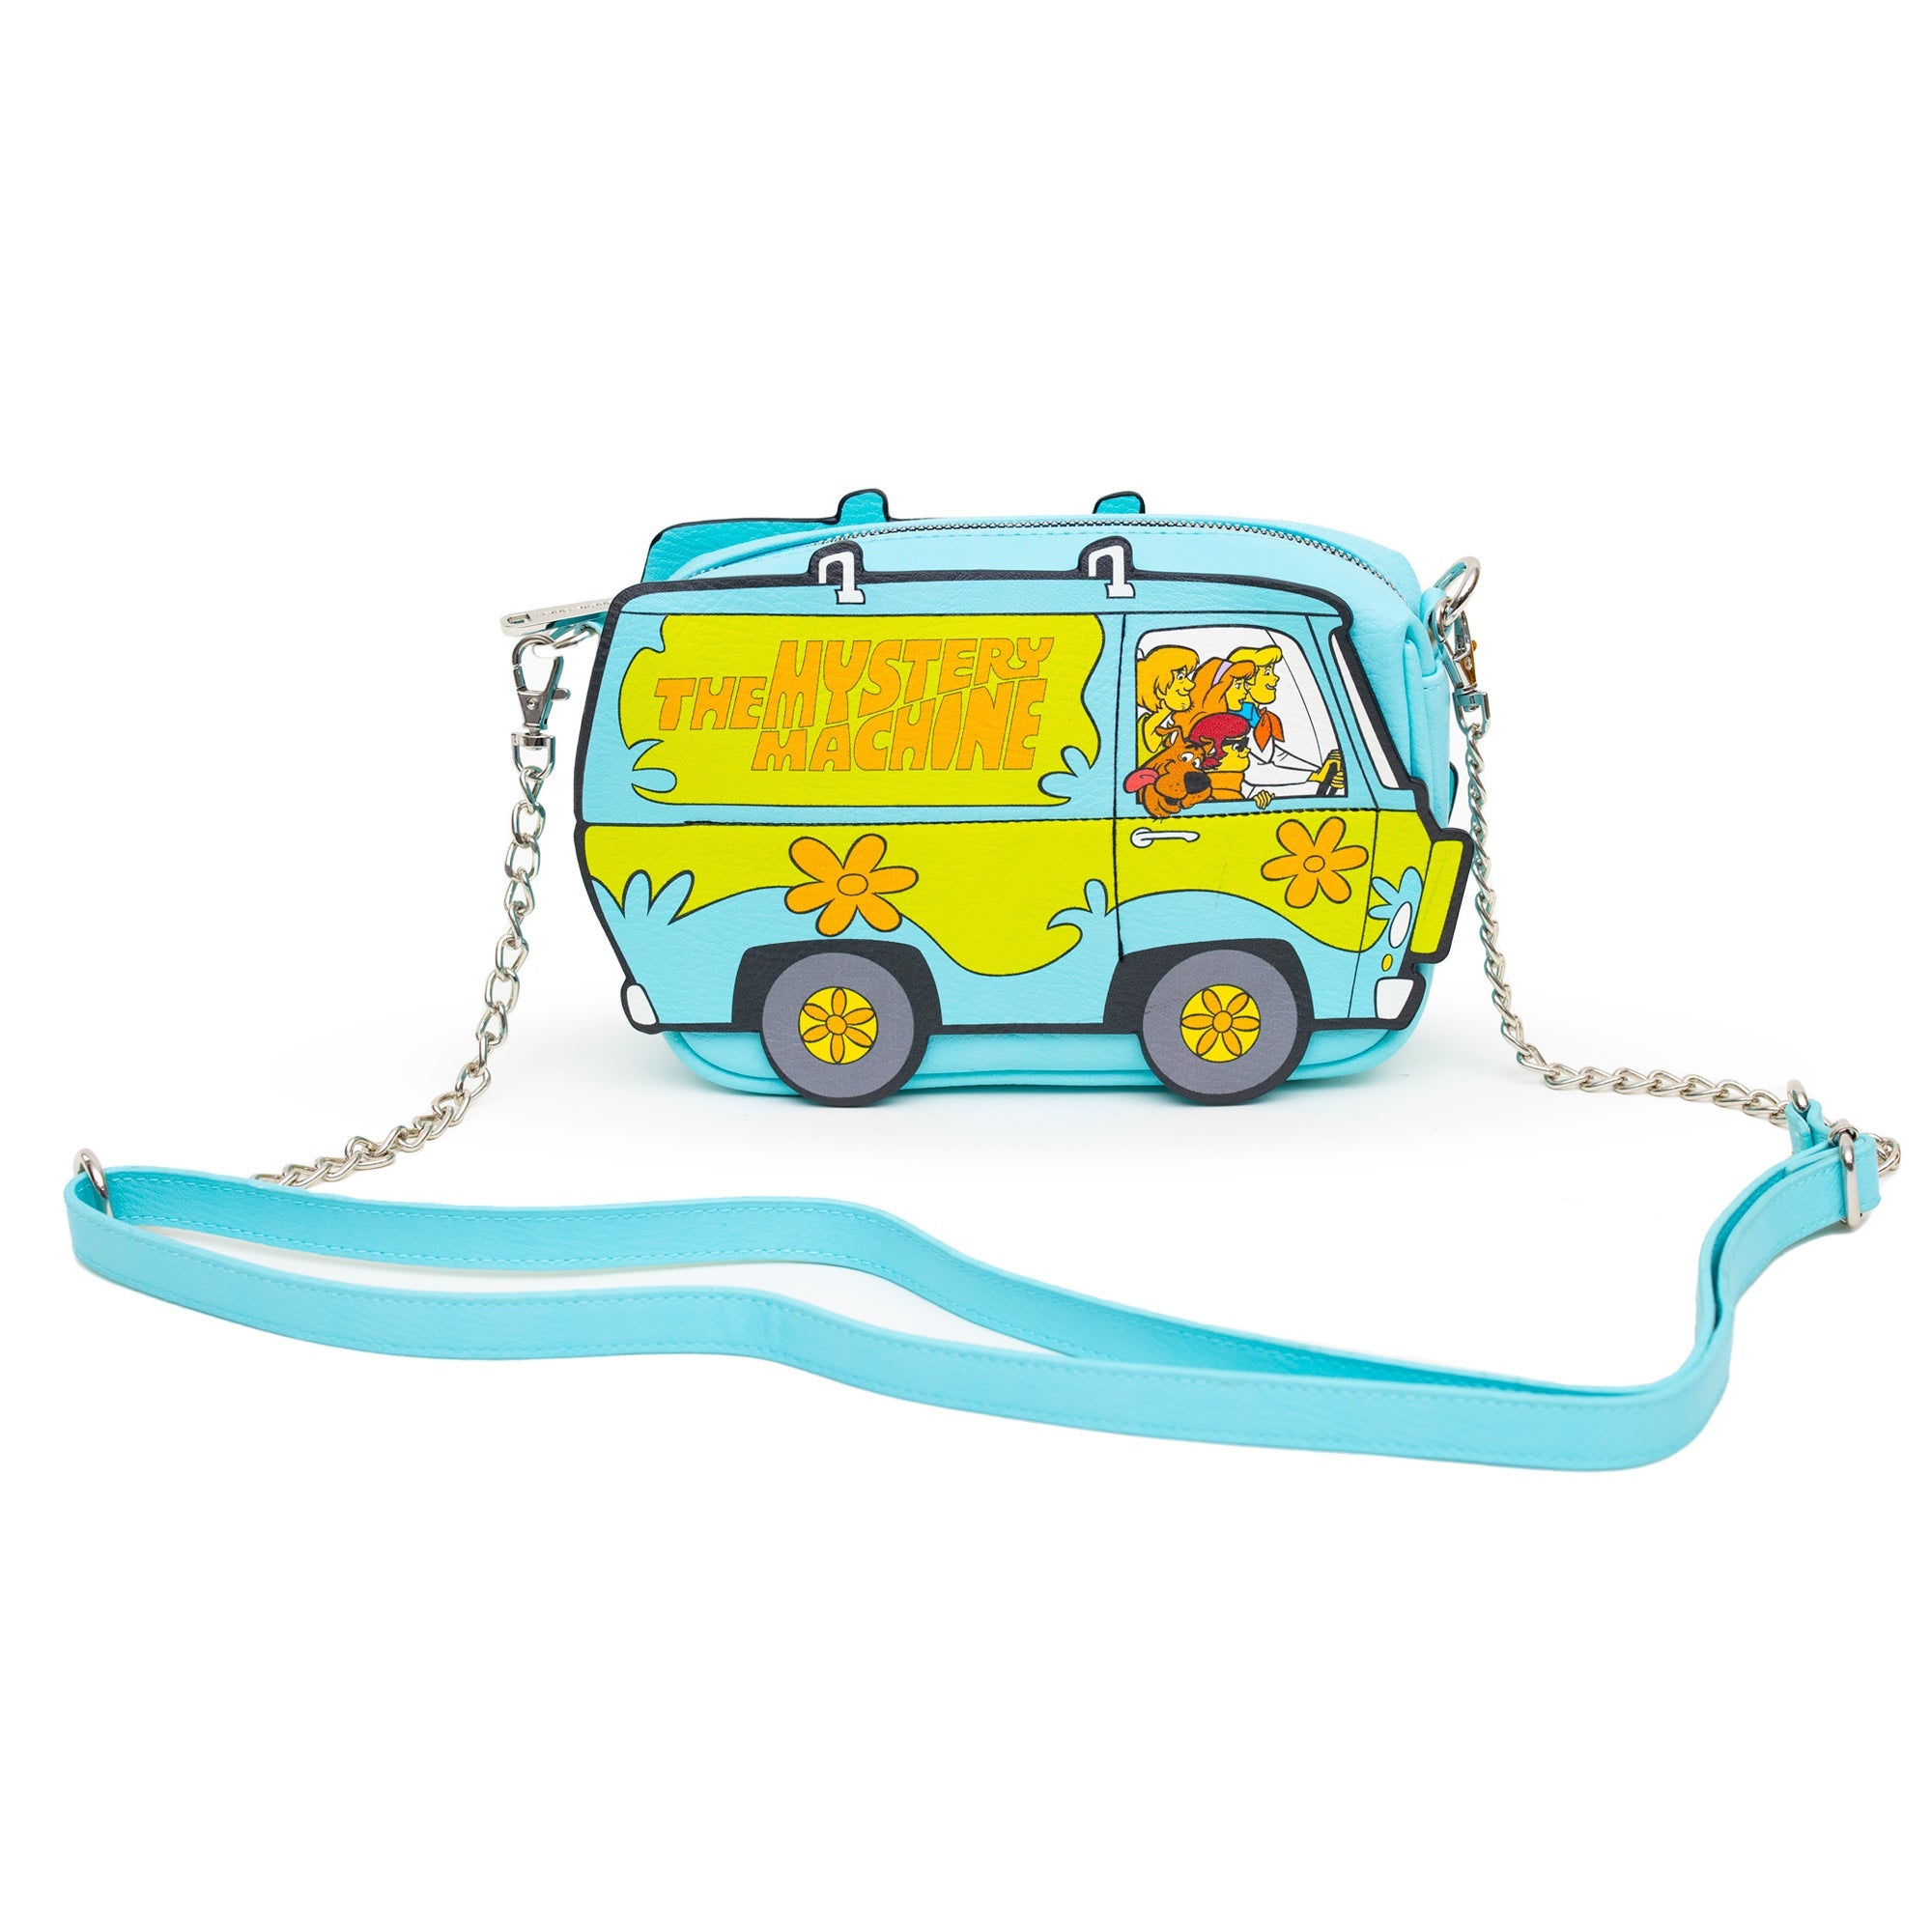 Scooby-Doo and Friends in Mystery Machine Crossbody Bag